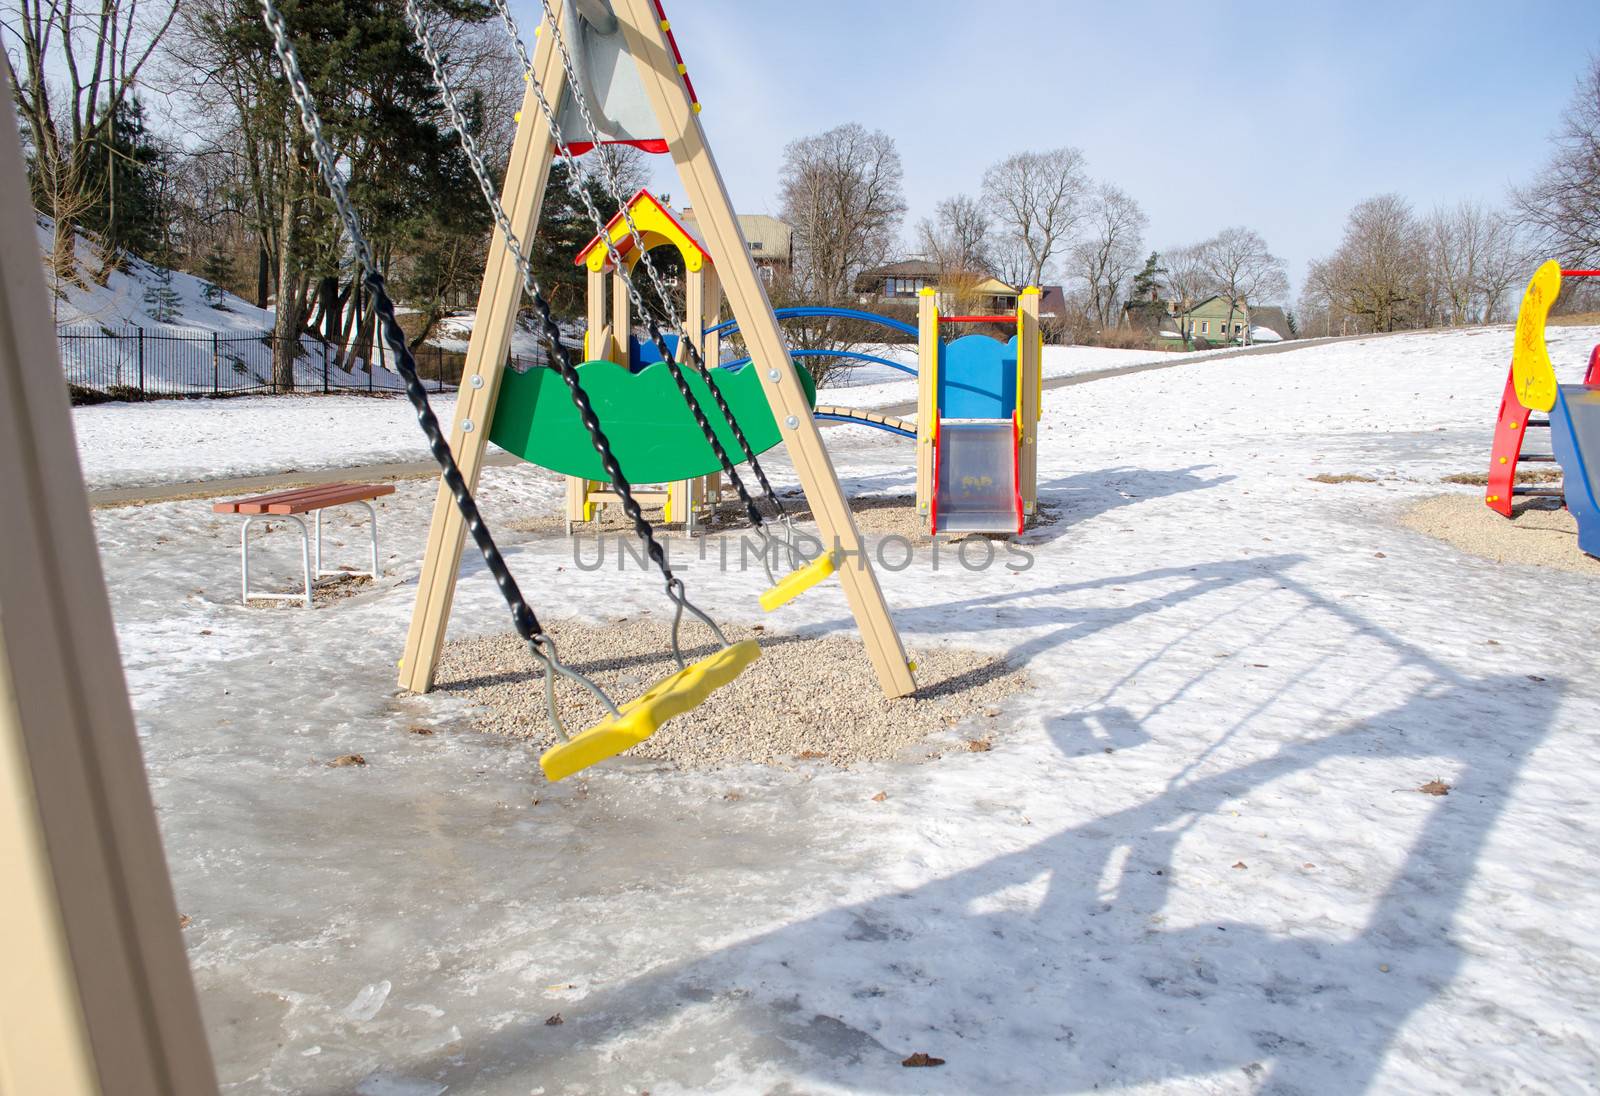 view of a colorful childrens playground in winter